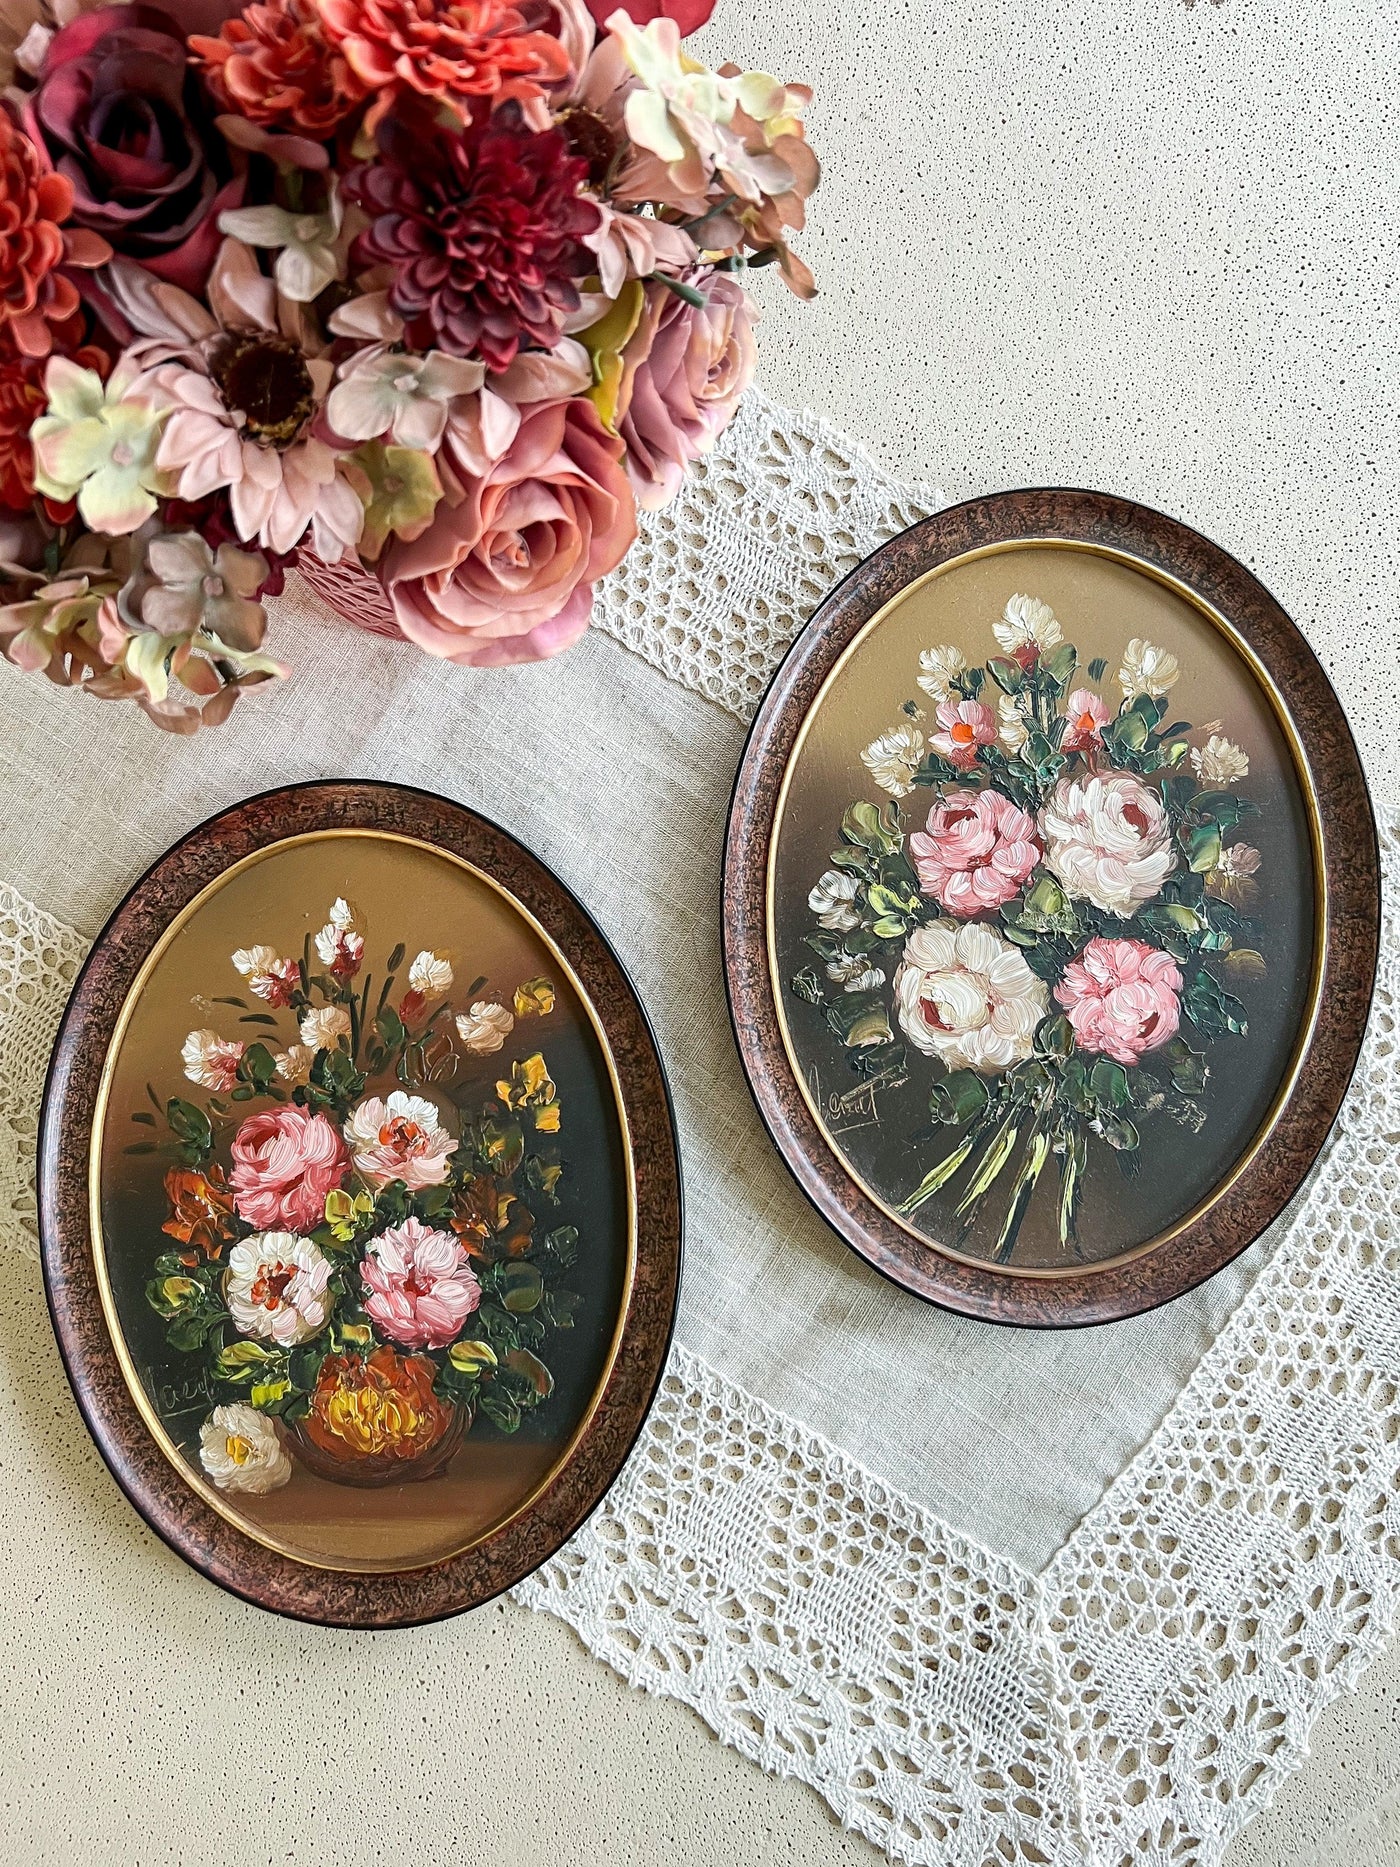 Pair of Vintage Oval Floral Framed Wall Art Revive In Style Vintage Furniture Painted Refinished Redesign Beautiful One of a Kind Artistic Antique Unique Home Decor Interior Design French Country Shabby Chic Cottage Farmhouse Grandmillenial Coastal Chalk Paint Metallic Glam Eclectic Quality Dovetailed Rustic Furniture Painter Pinterest Bedroom Living Room Entryway Kitchen Home Trends House Styles Decorating ideas